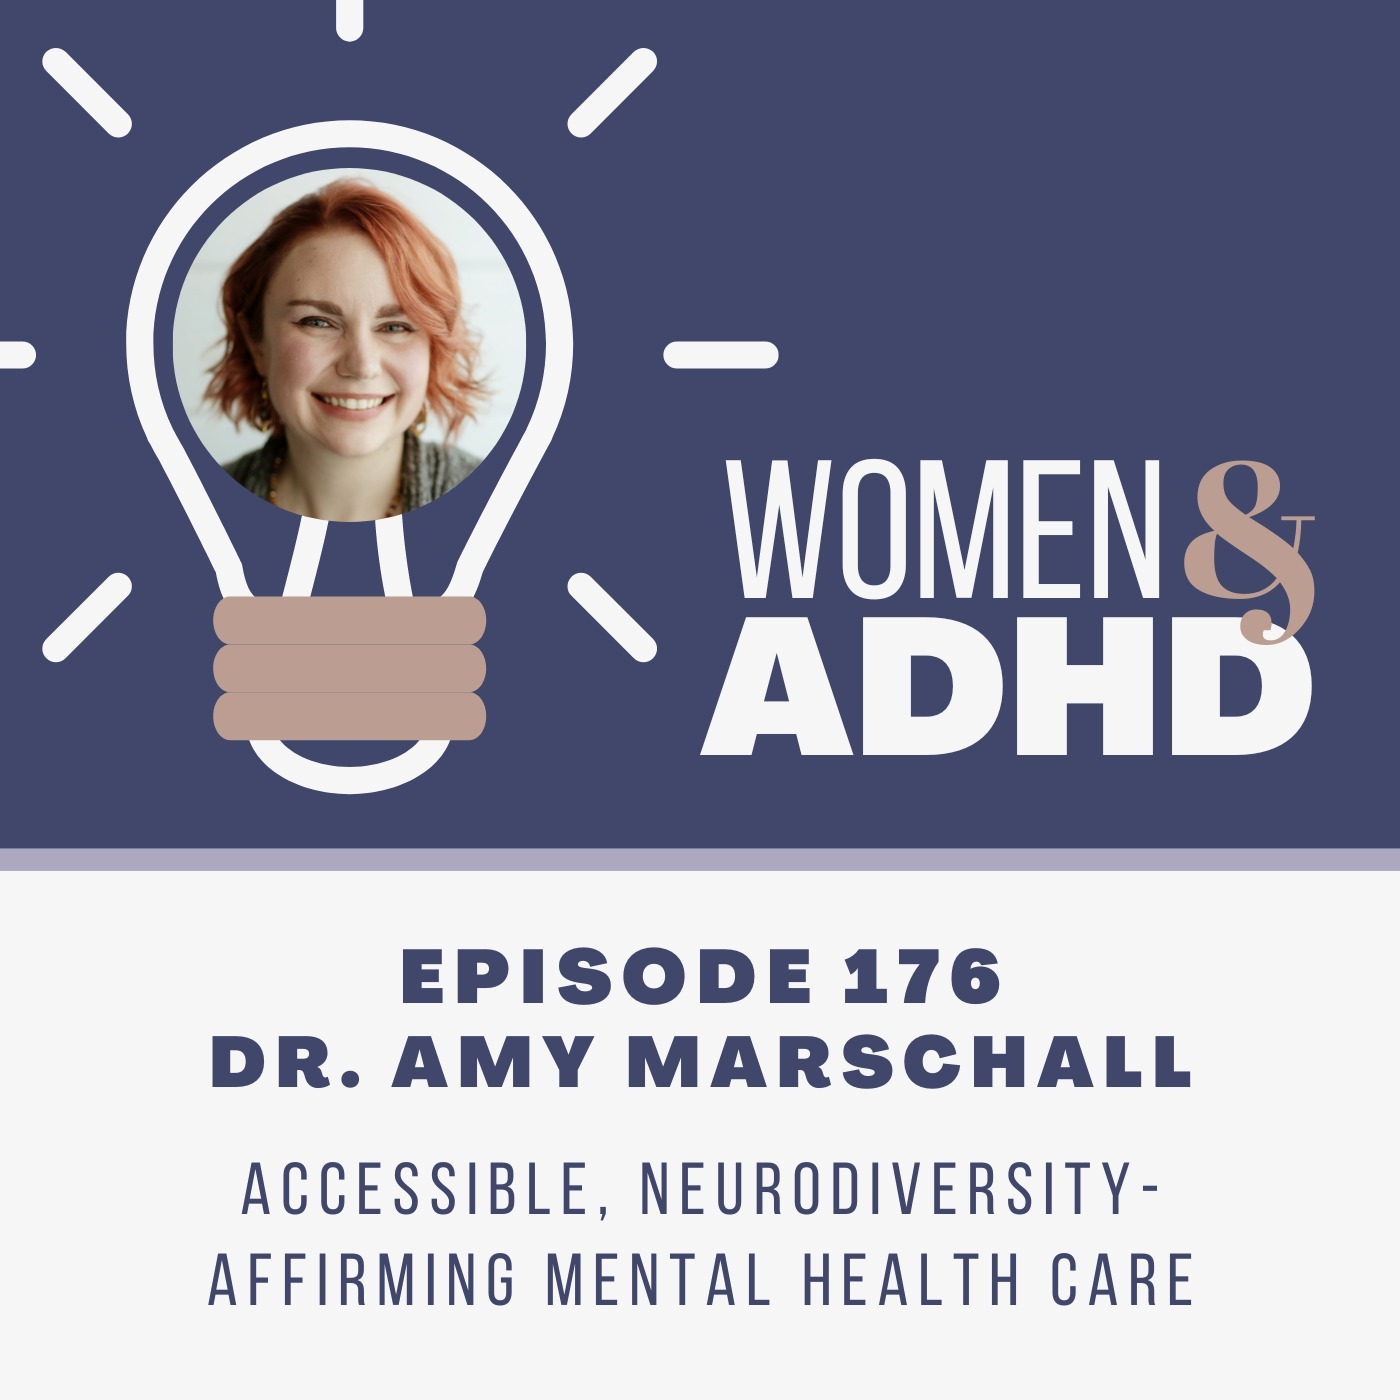 Dr. Amy Marschall: Accessible, neurodiversity-affirming mental health care